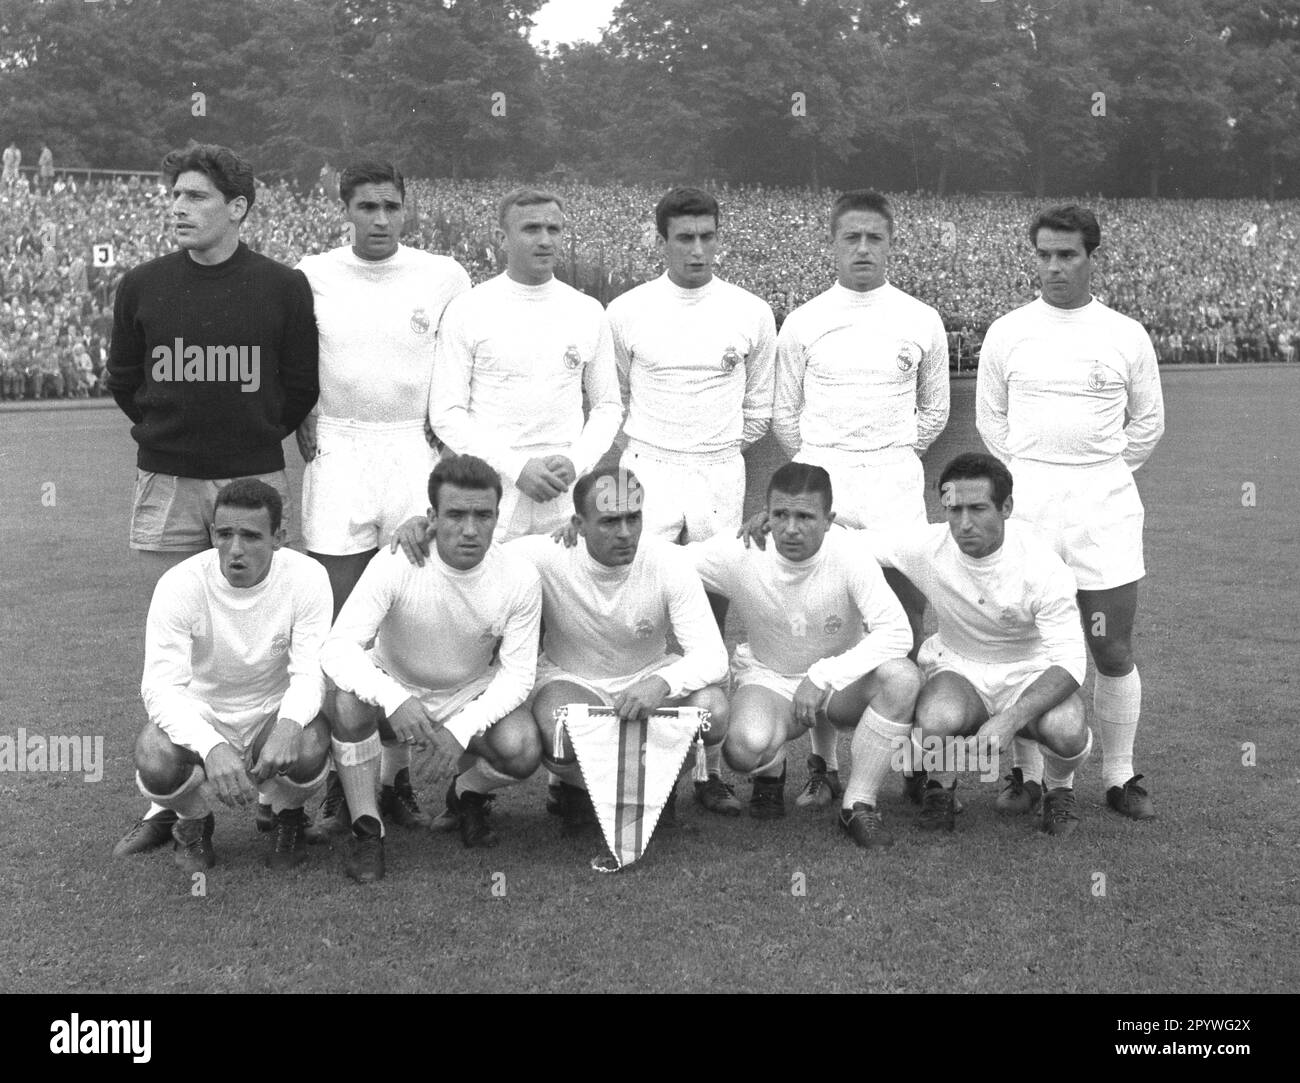 International friendly match: 1. FC Köln - Real Madrid 4:5/13.08.1960. 11-man Real Madrid team before the match. Back from left: Tw. Rogelio Dominguez, Marquitos, Jose Emilio Santamaria, Pachin, Jose Maria Vidal and Jose Maria Zarraga. In front from left: Canario. Luis Del Sol, Alfredo Di Stefano, Ferenc Puskas and Francisco Gento. For journalistic use only! Only for editorial use! [automated translation] Stock Photo